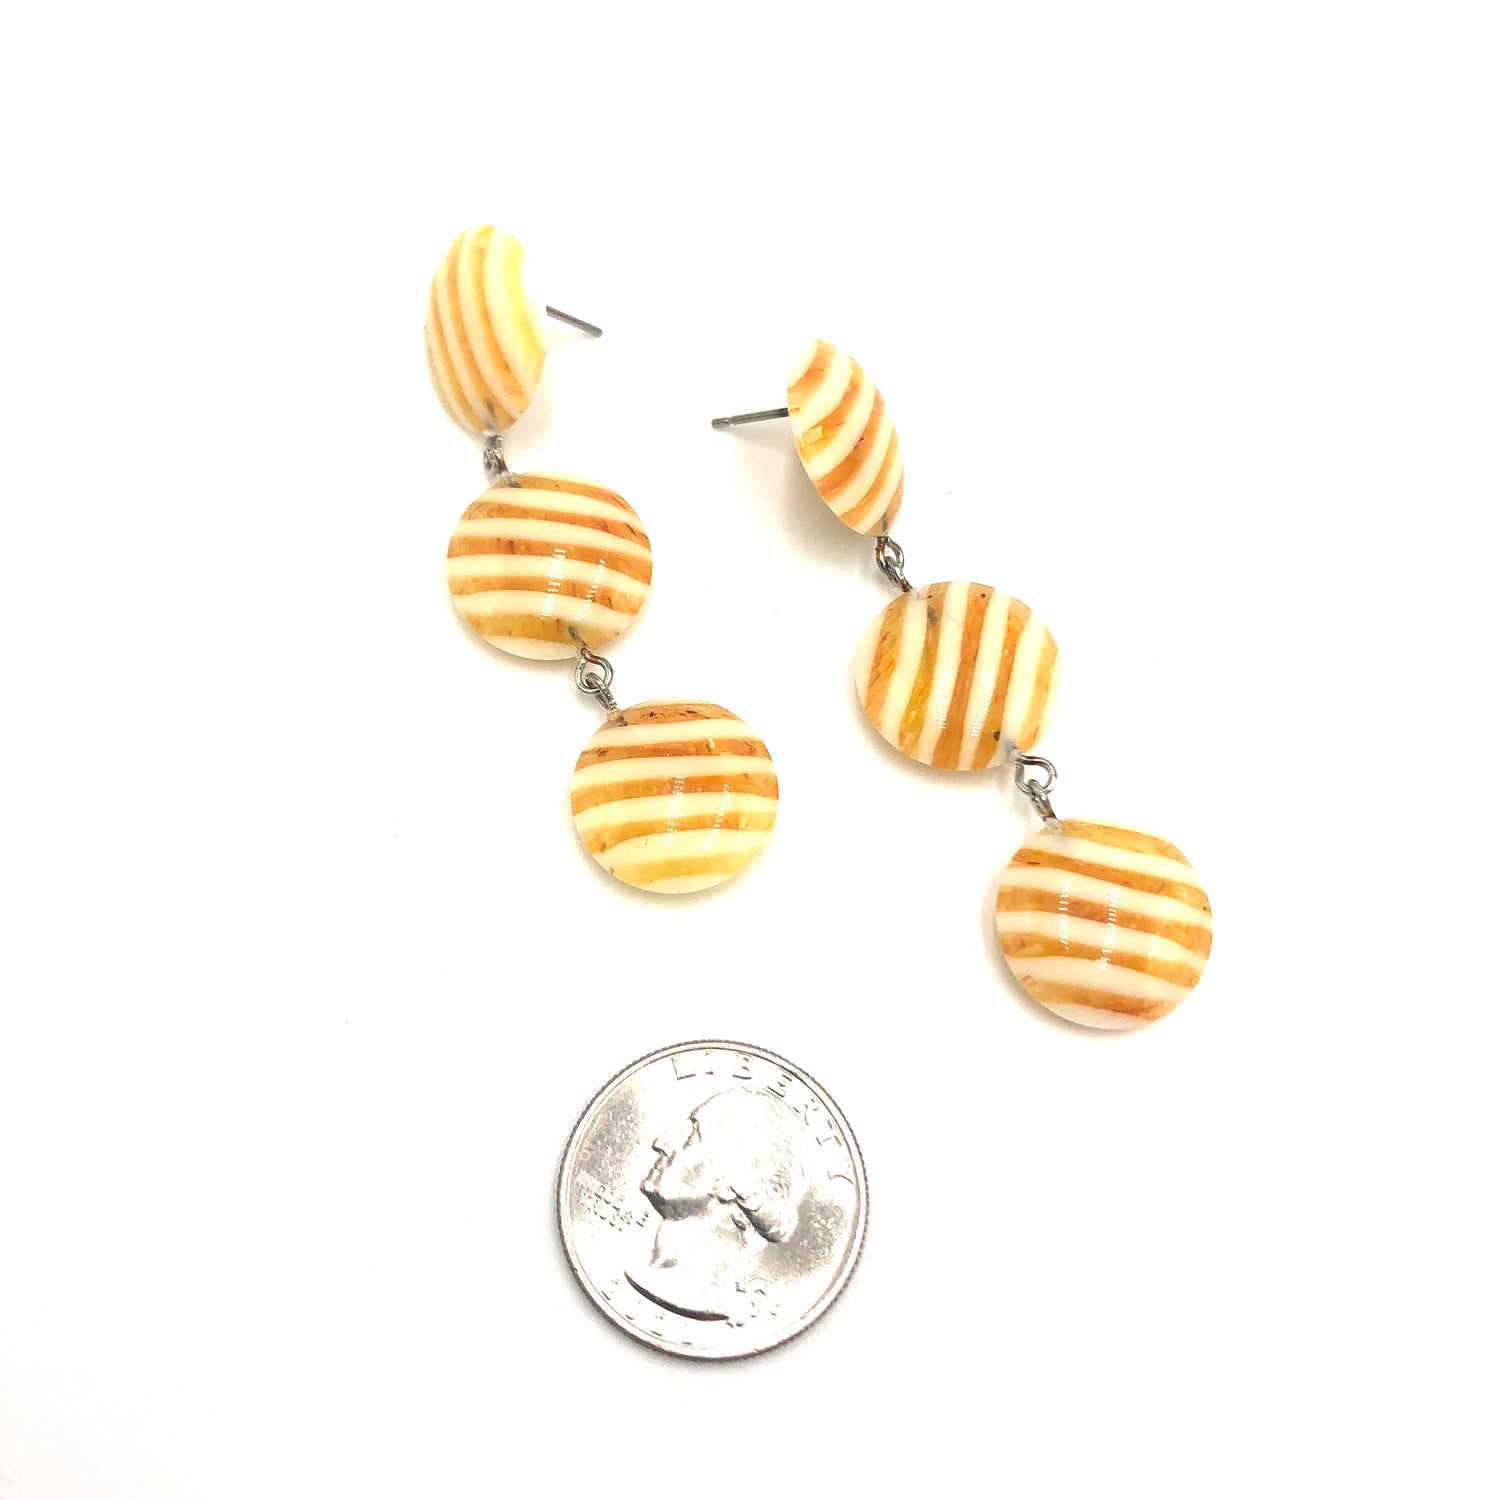 dark yellow and off white earrings